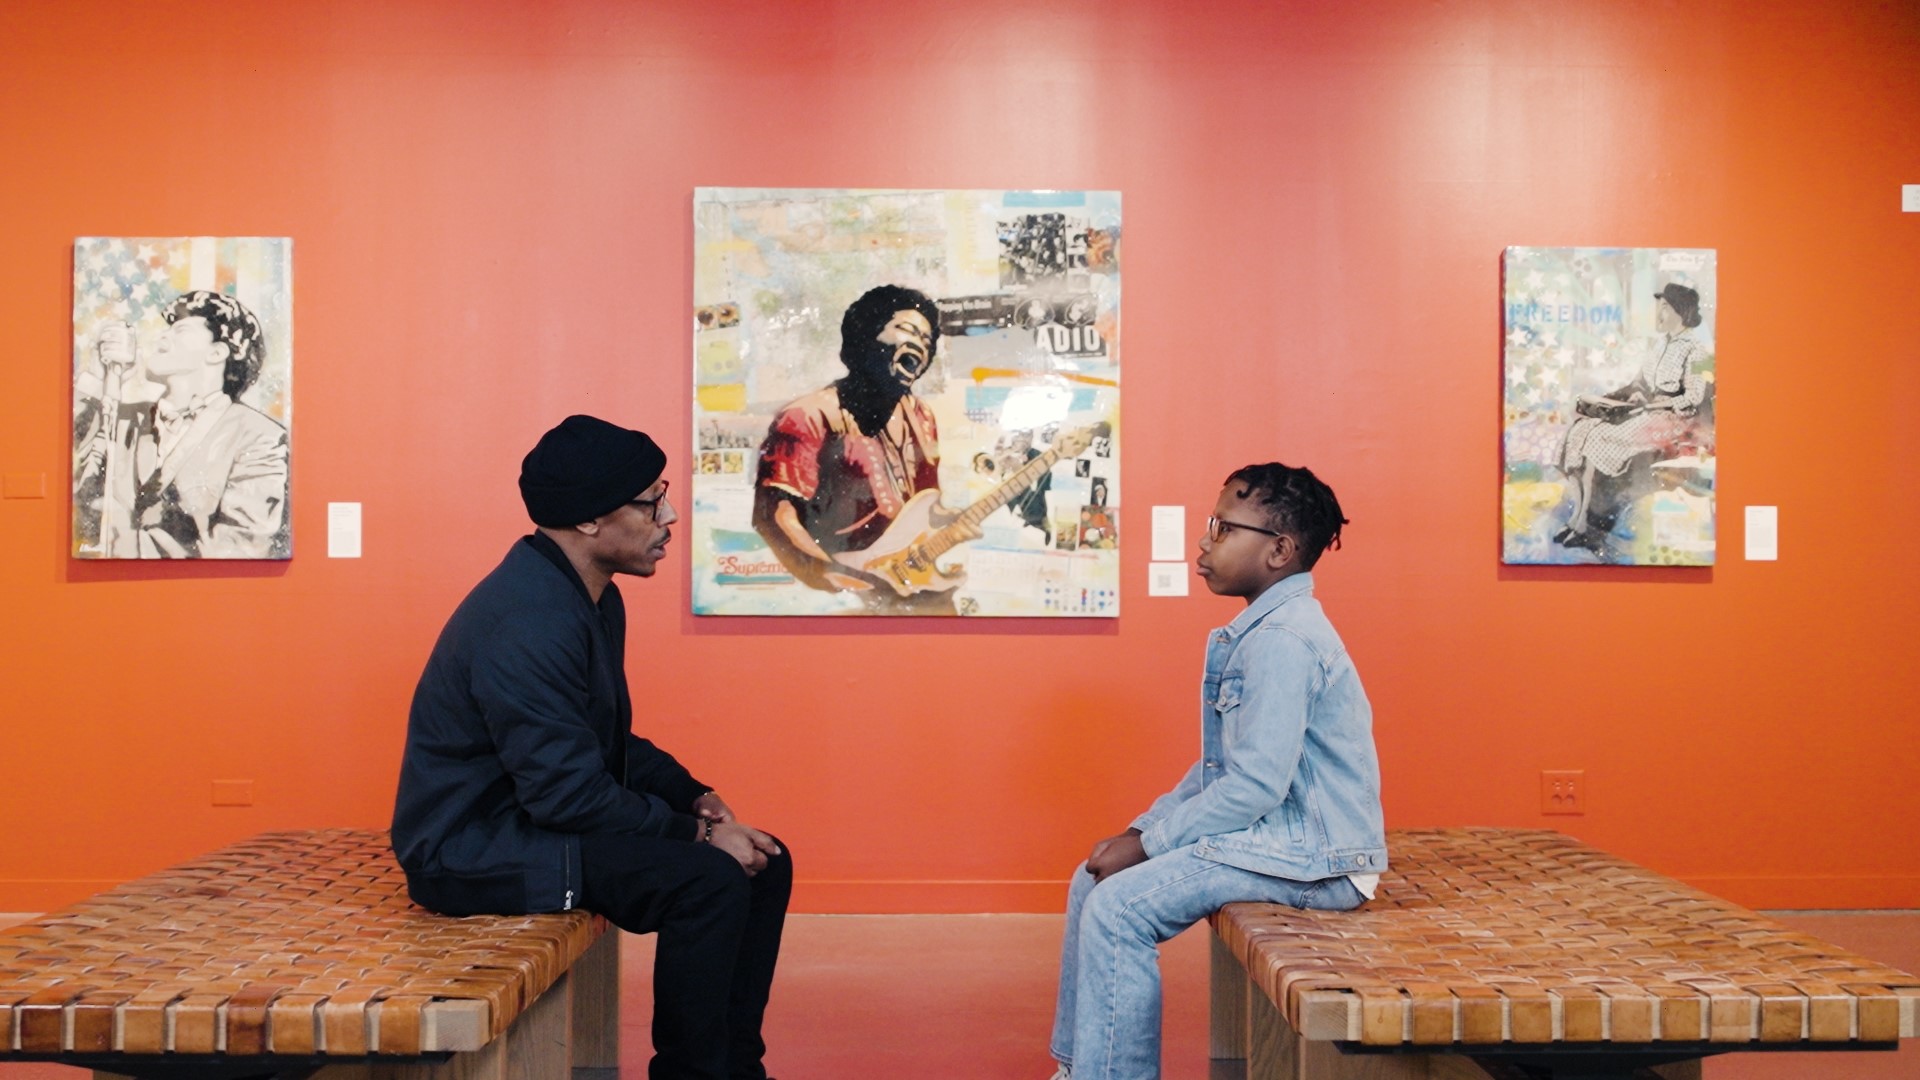 Chris and his 11-year-old son Amari have an honest conversation about what it means to be Black in America.